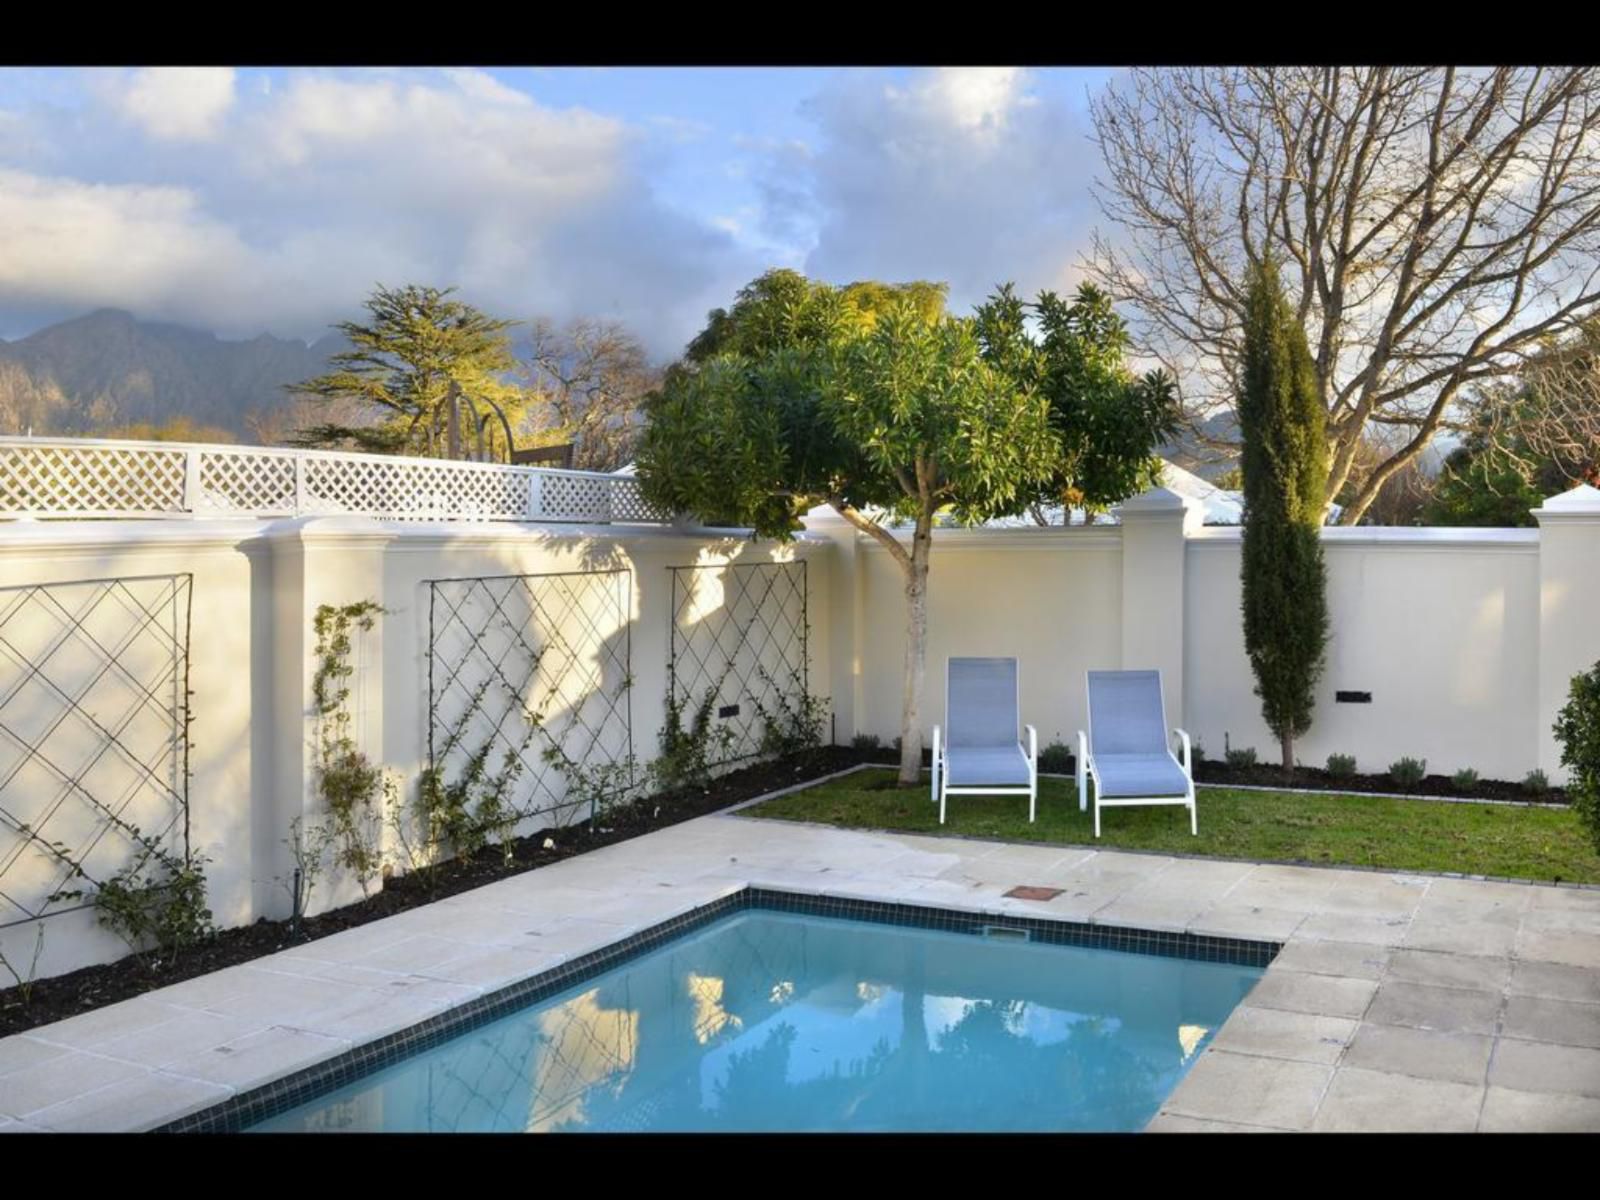 10 Villefranche Franschhoek Western Cape South Africa House, Building, Architecture, Palm Tree, Plant, Nature, Wood, Garden, Swimming Pool